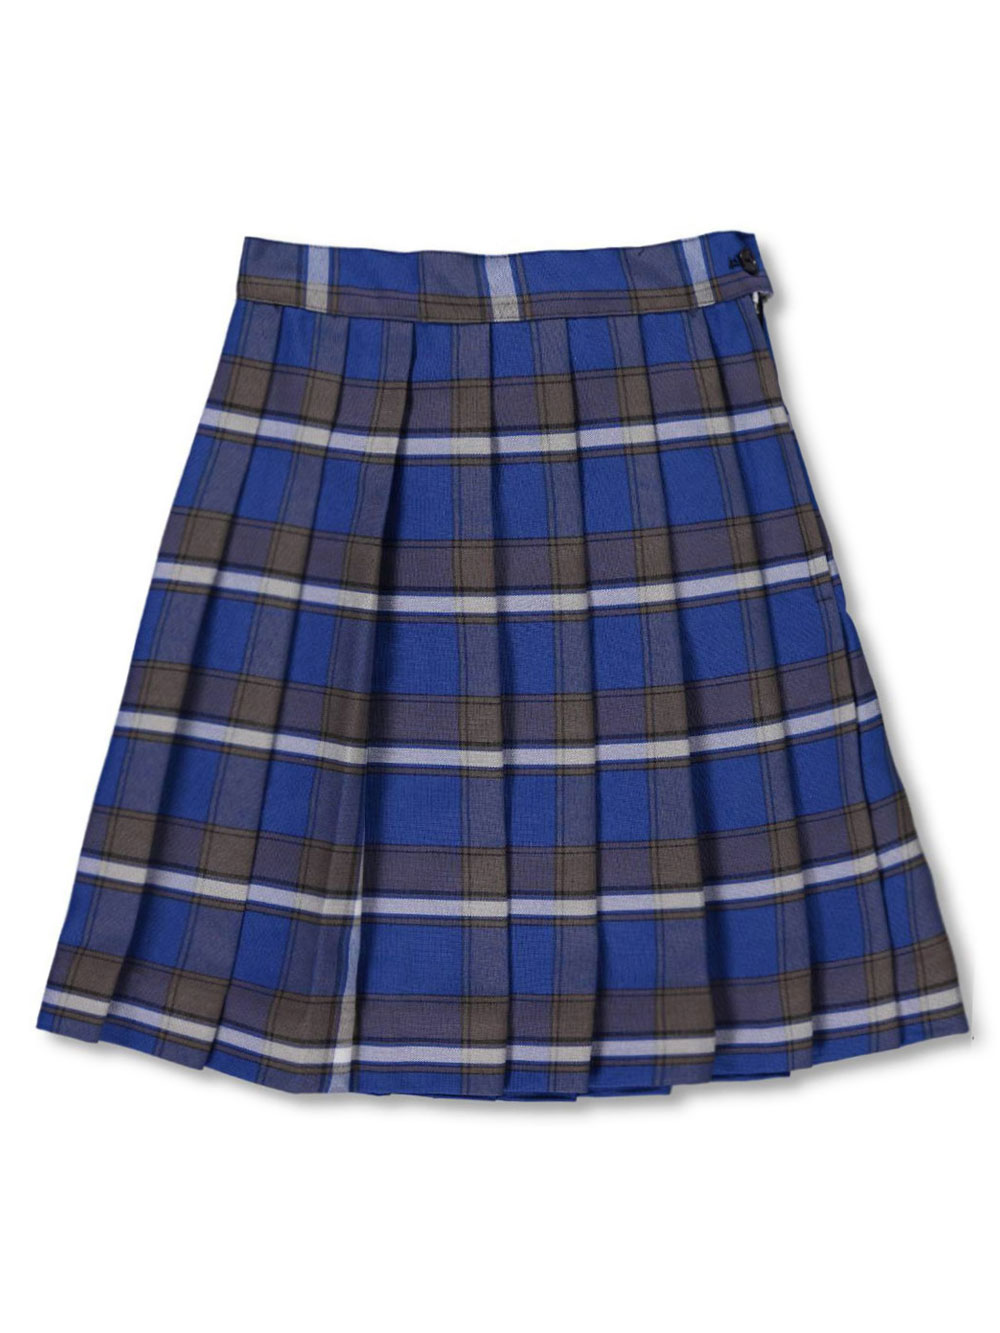 Cookie's Big Girls' Pleated Skirt